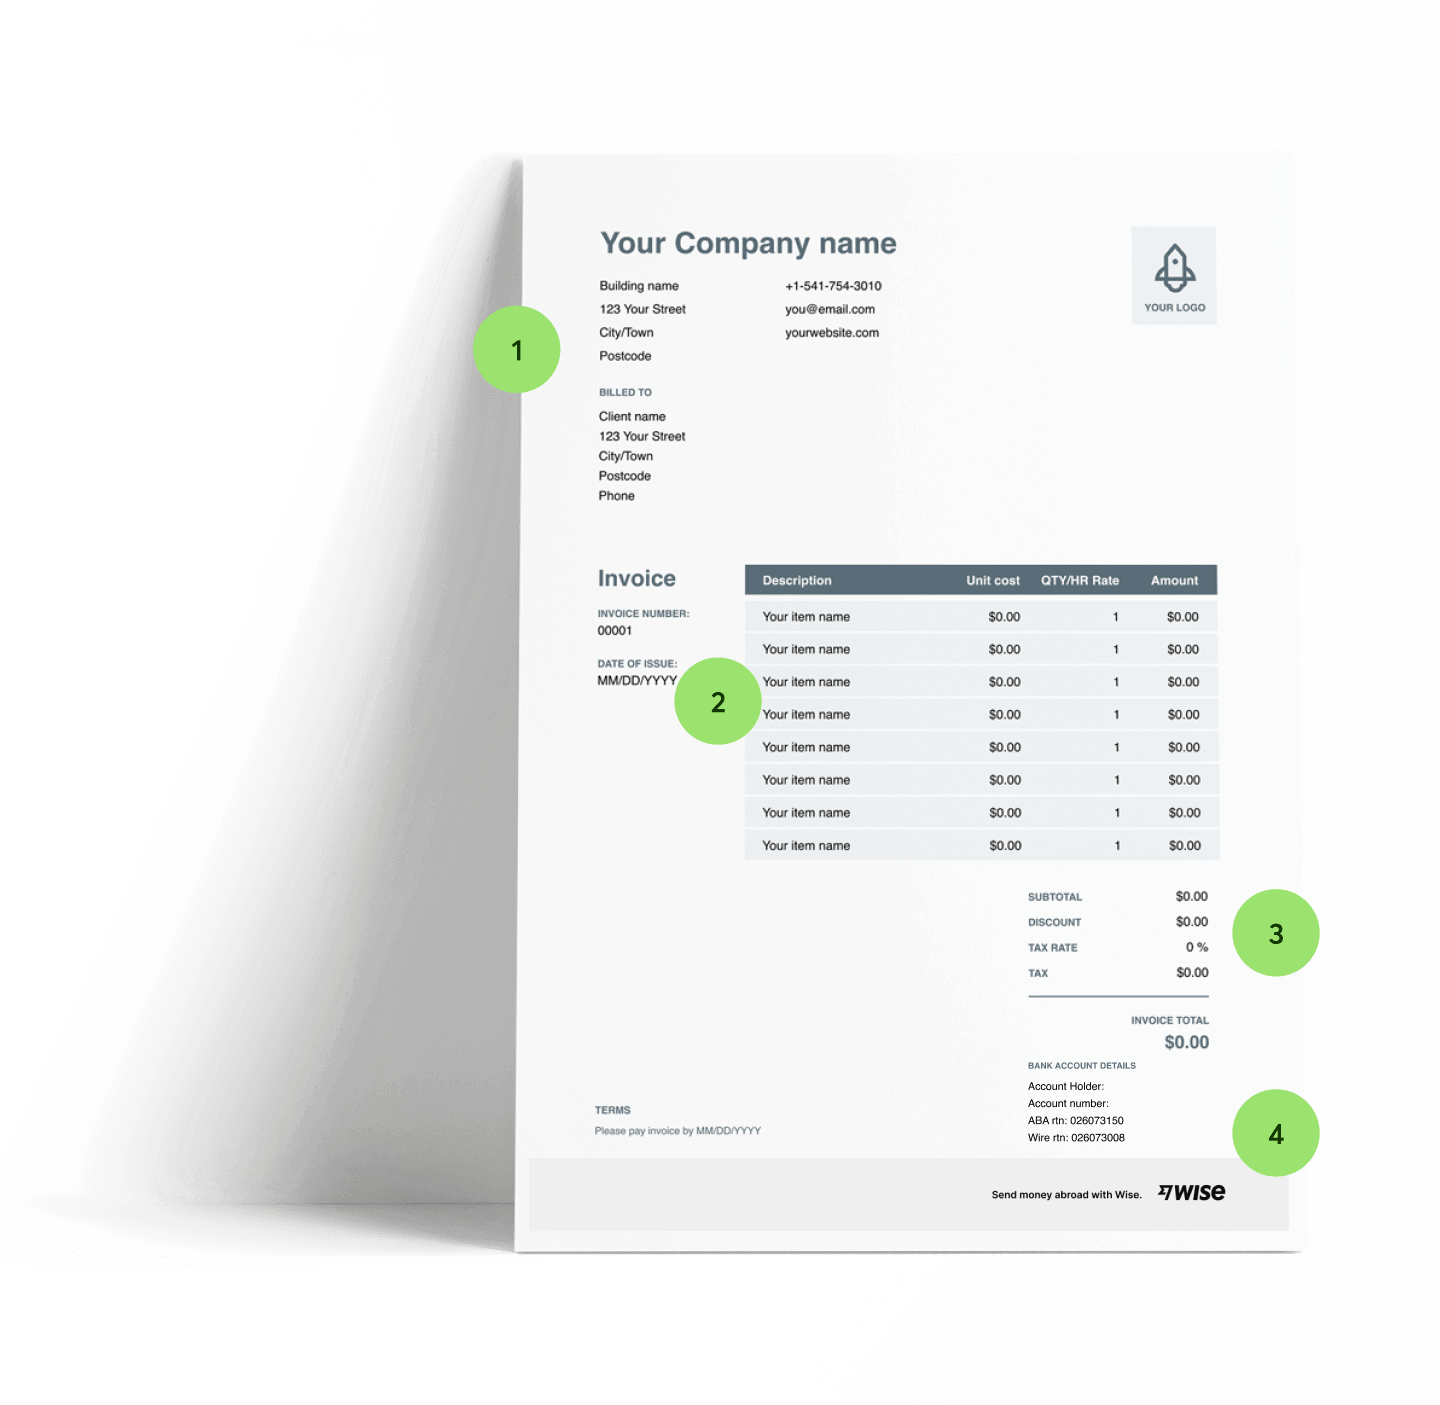 How to write a photography invoice?